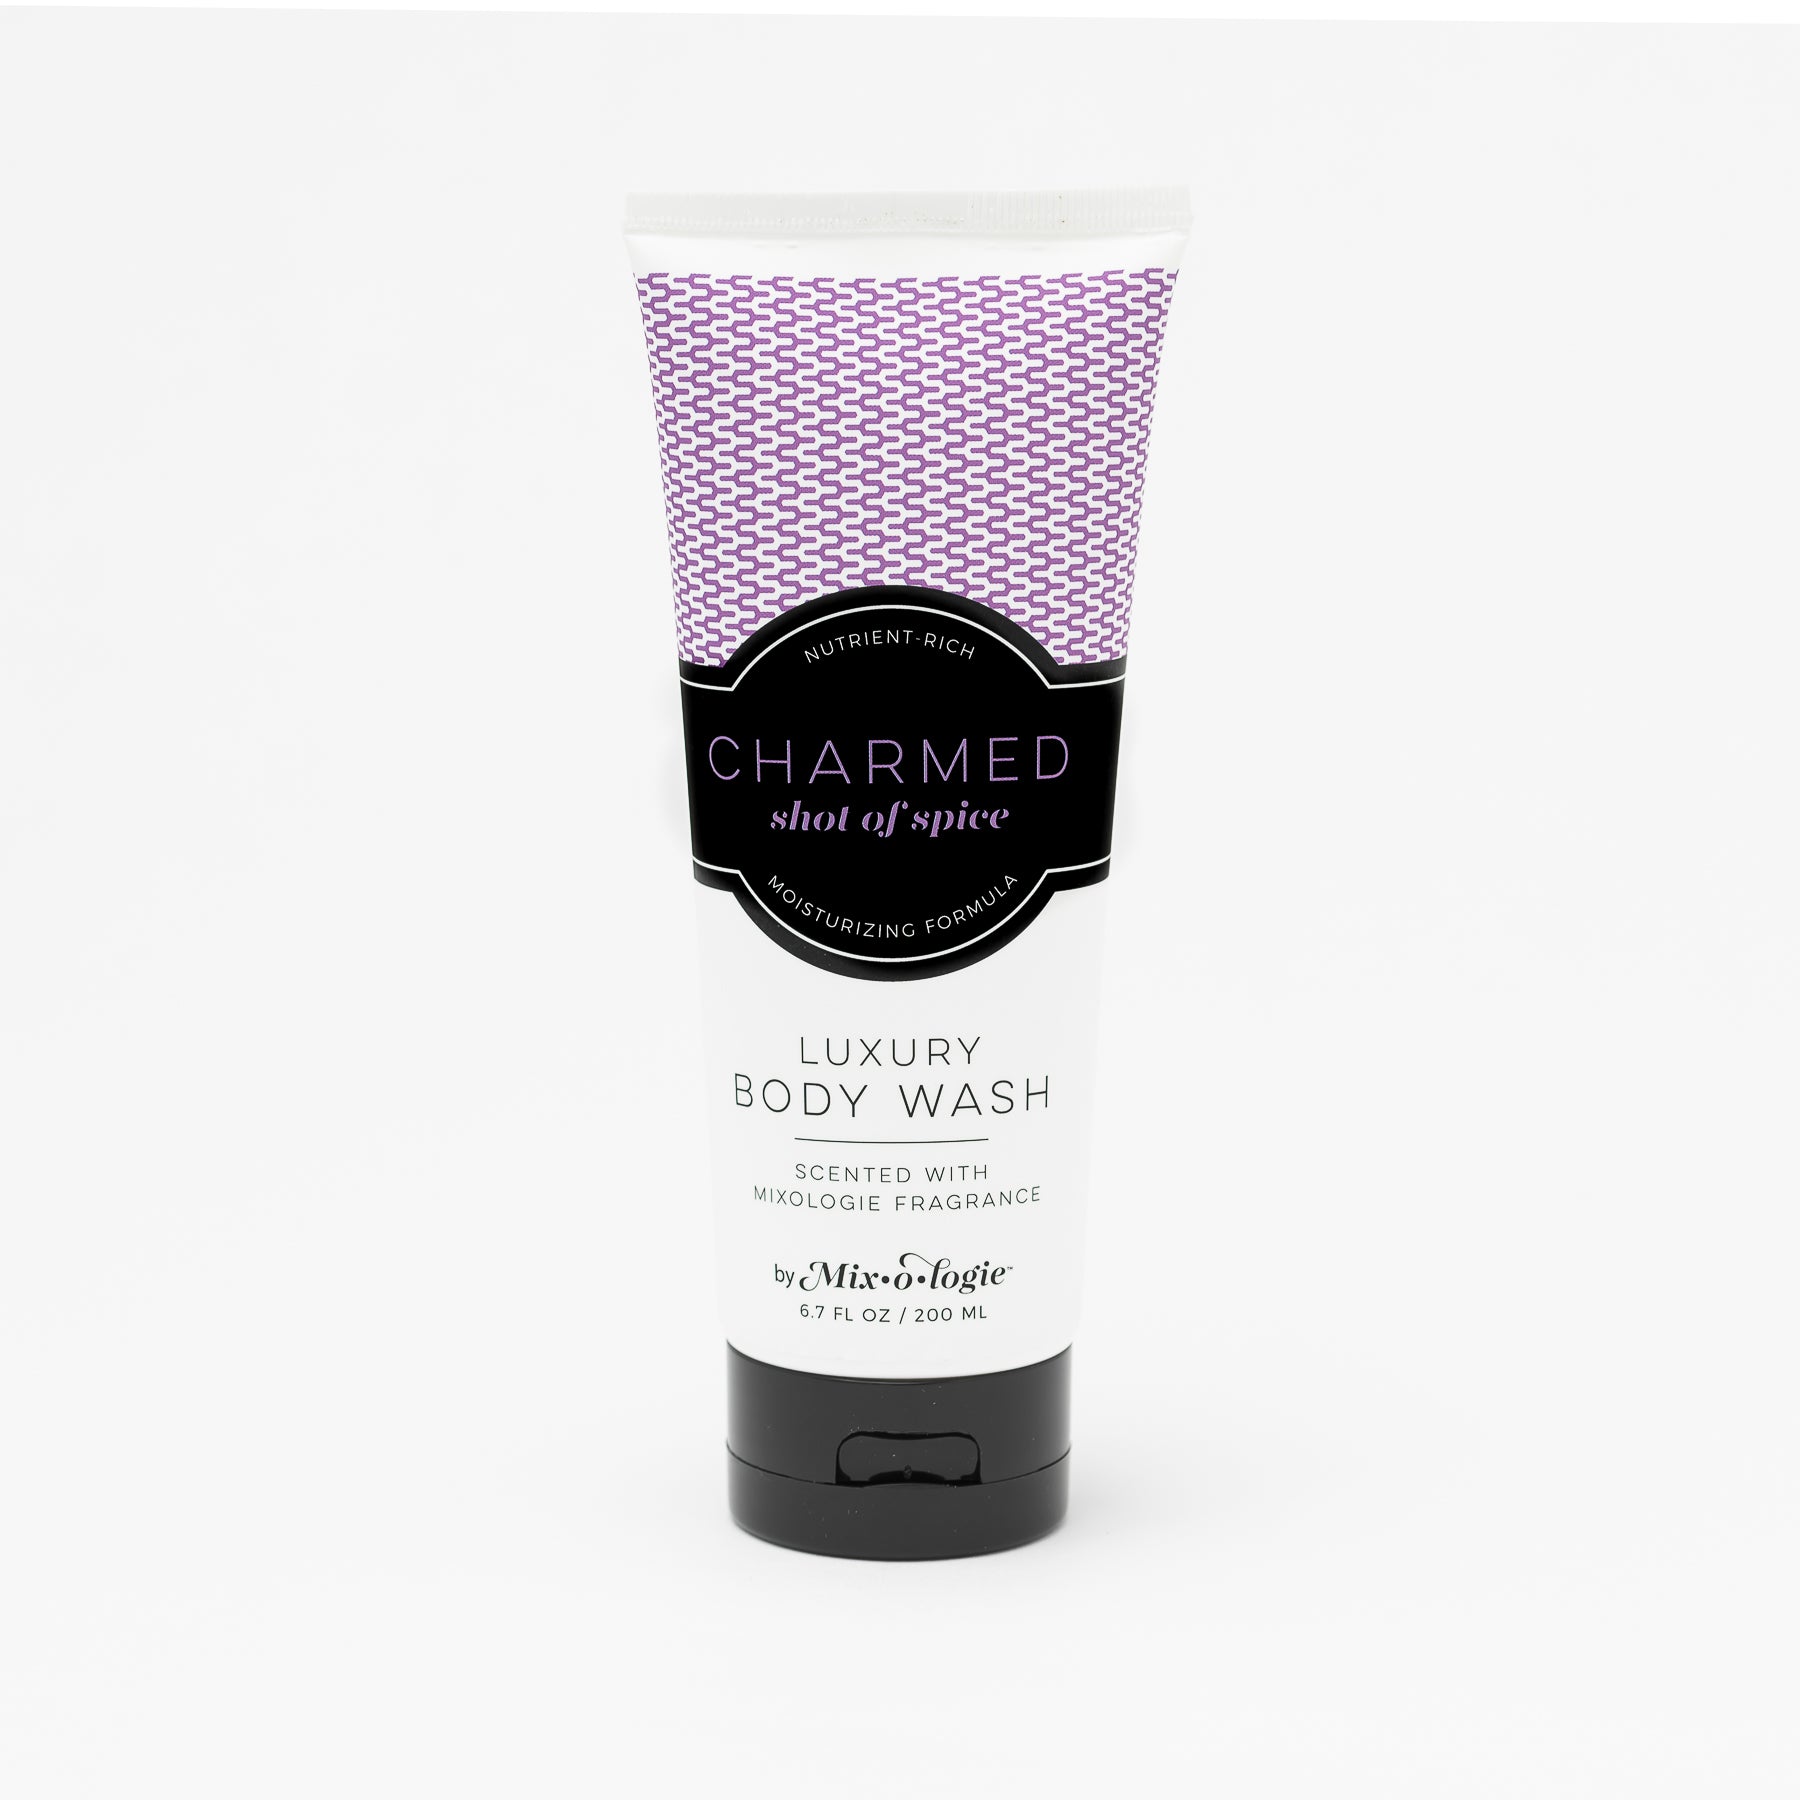 Luxury Body Wash in Mixologie’s Chamred (Shot of Spice) in purple color sample package with black label. Contains 6.7 fl oz or 200 mL pictured on a white background. 